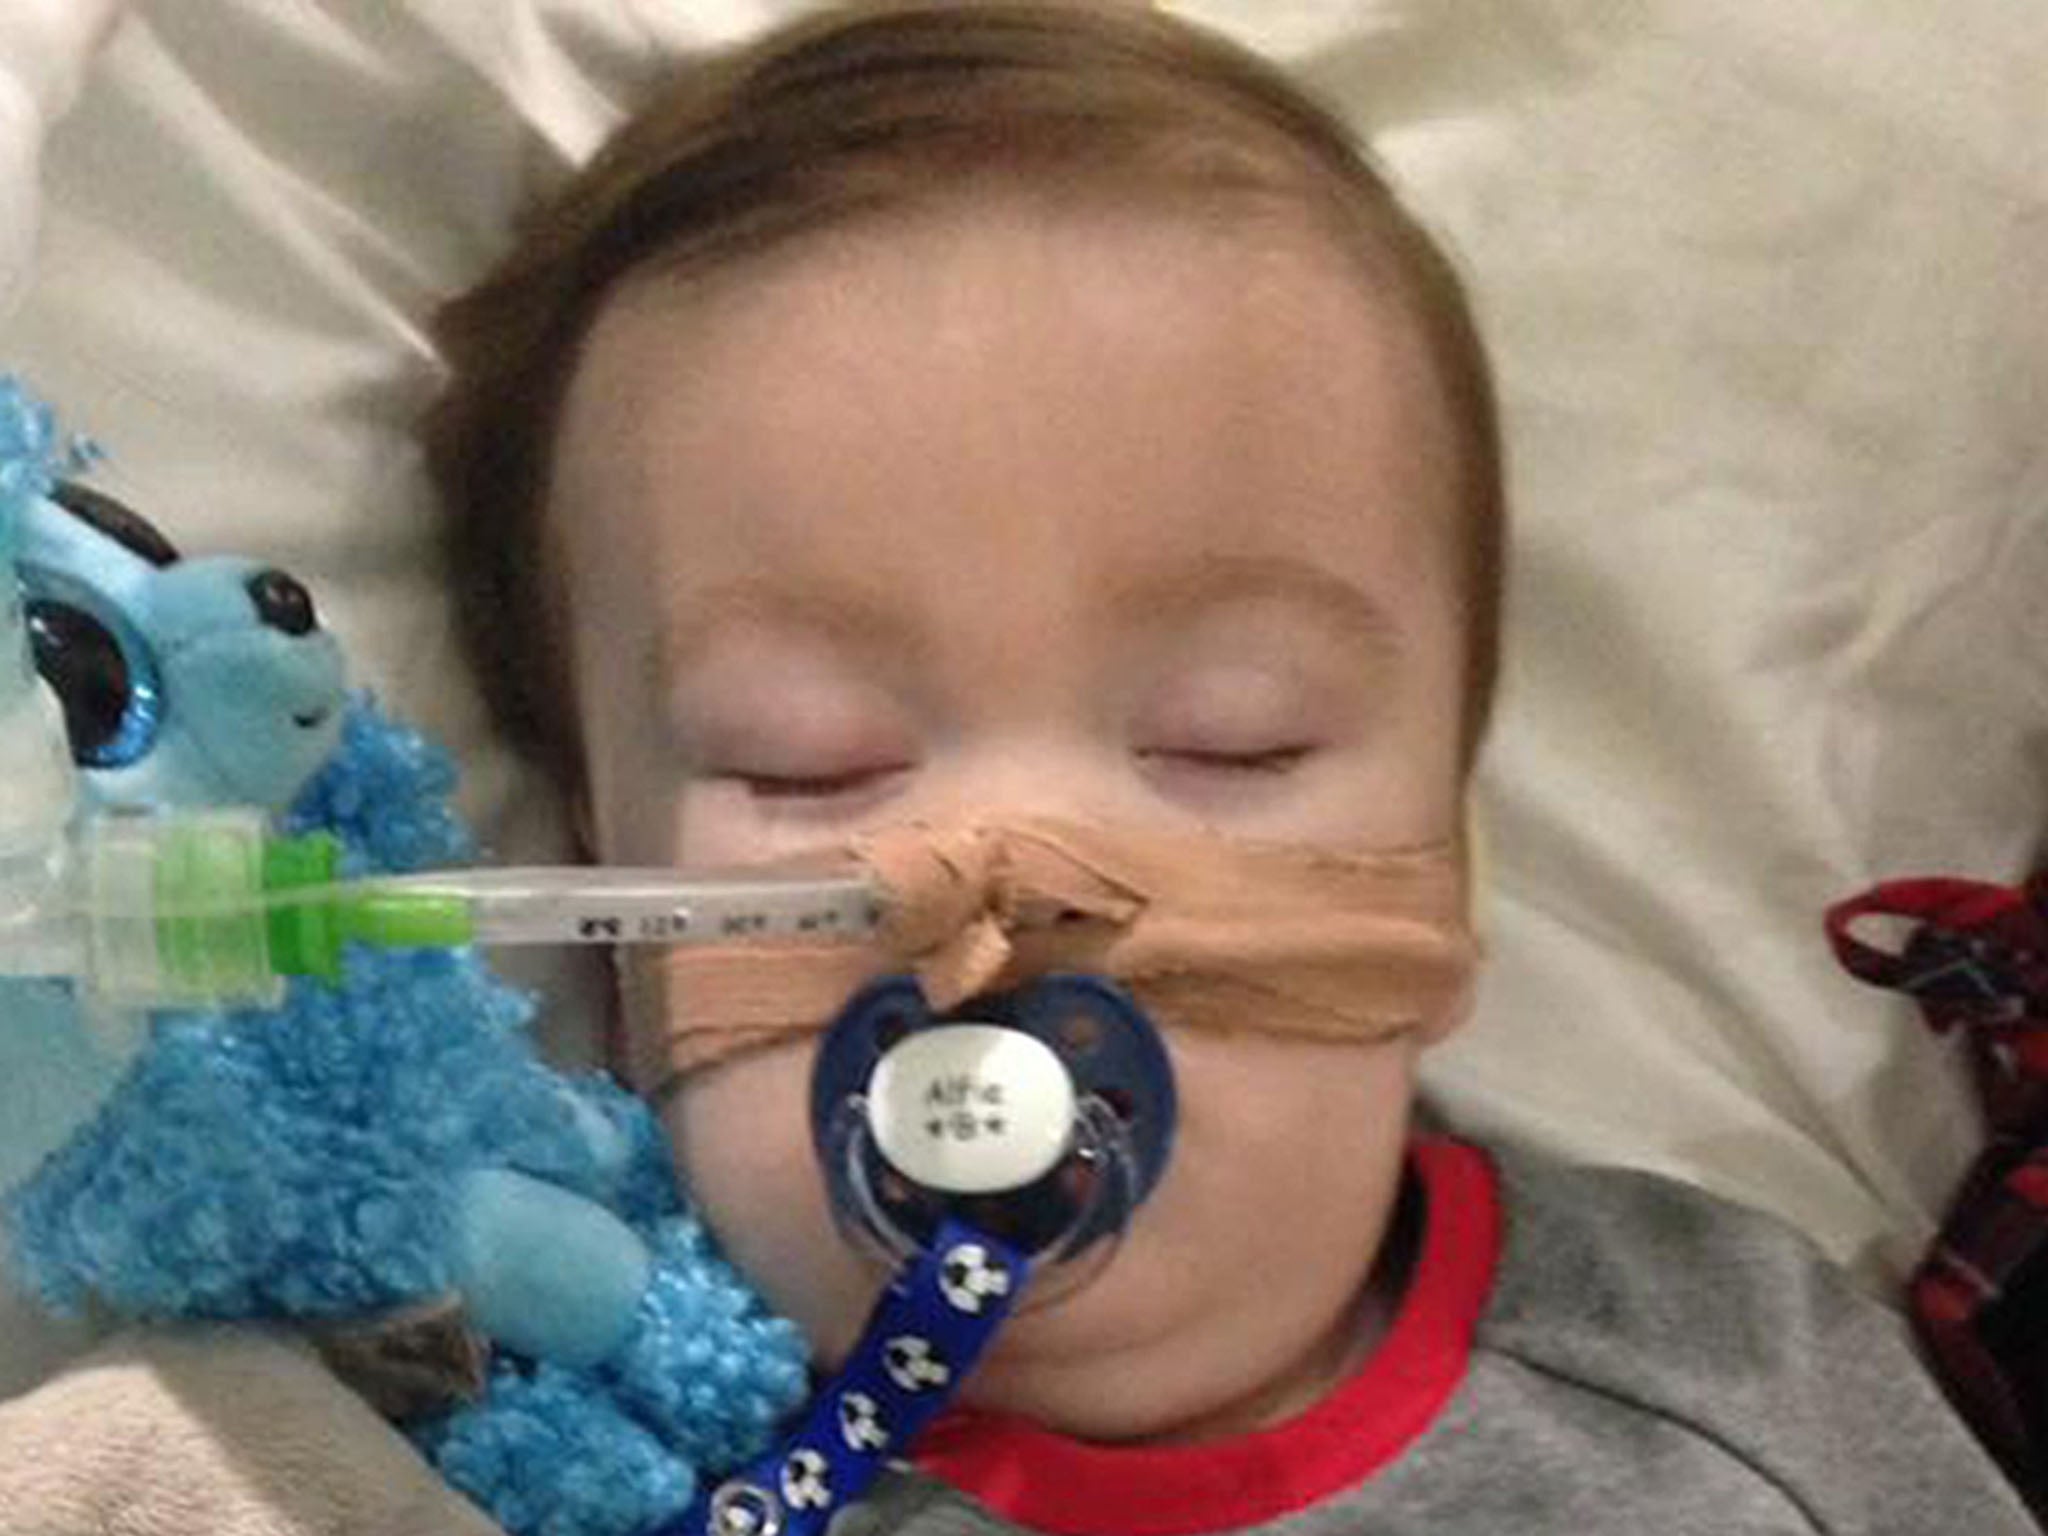 Judges have ruled that Alfie Evans' life support should be switched off